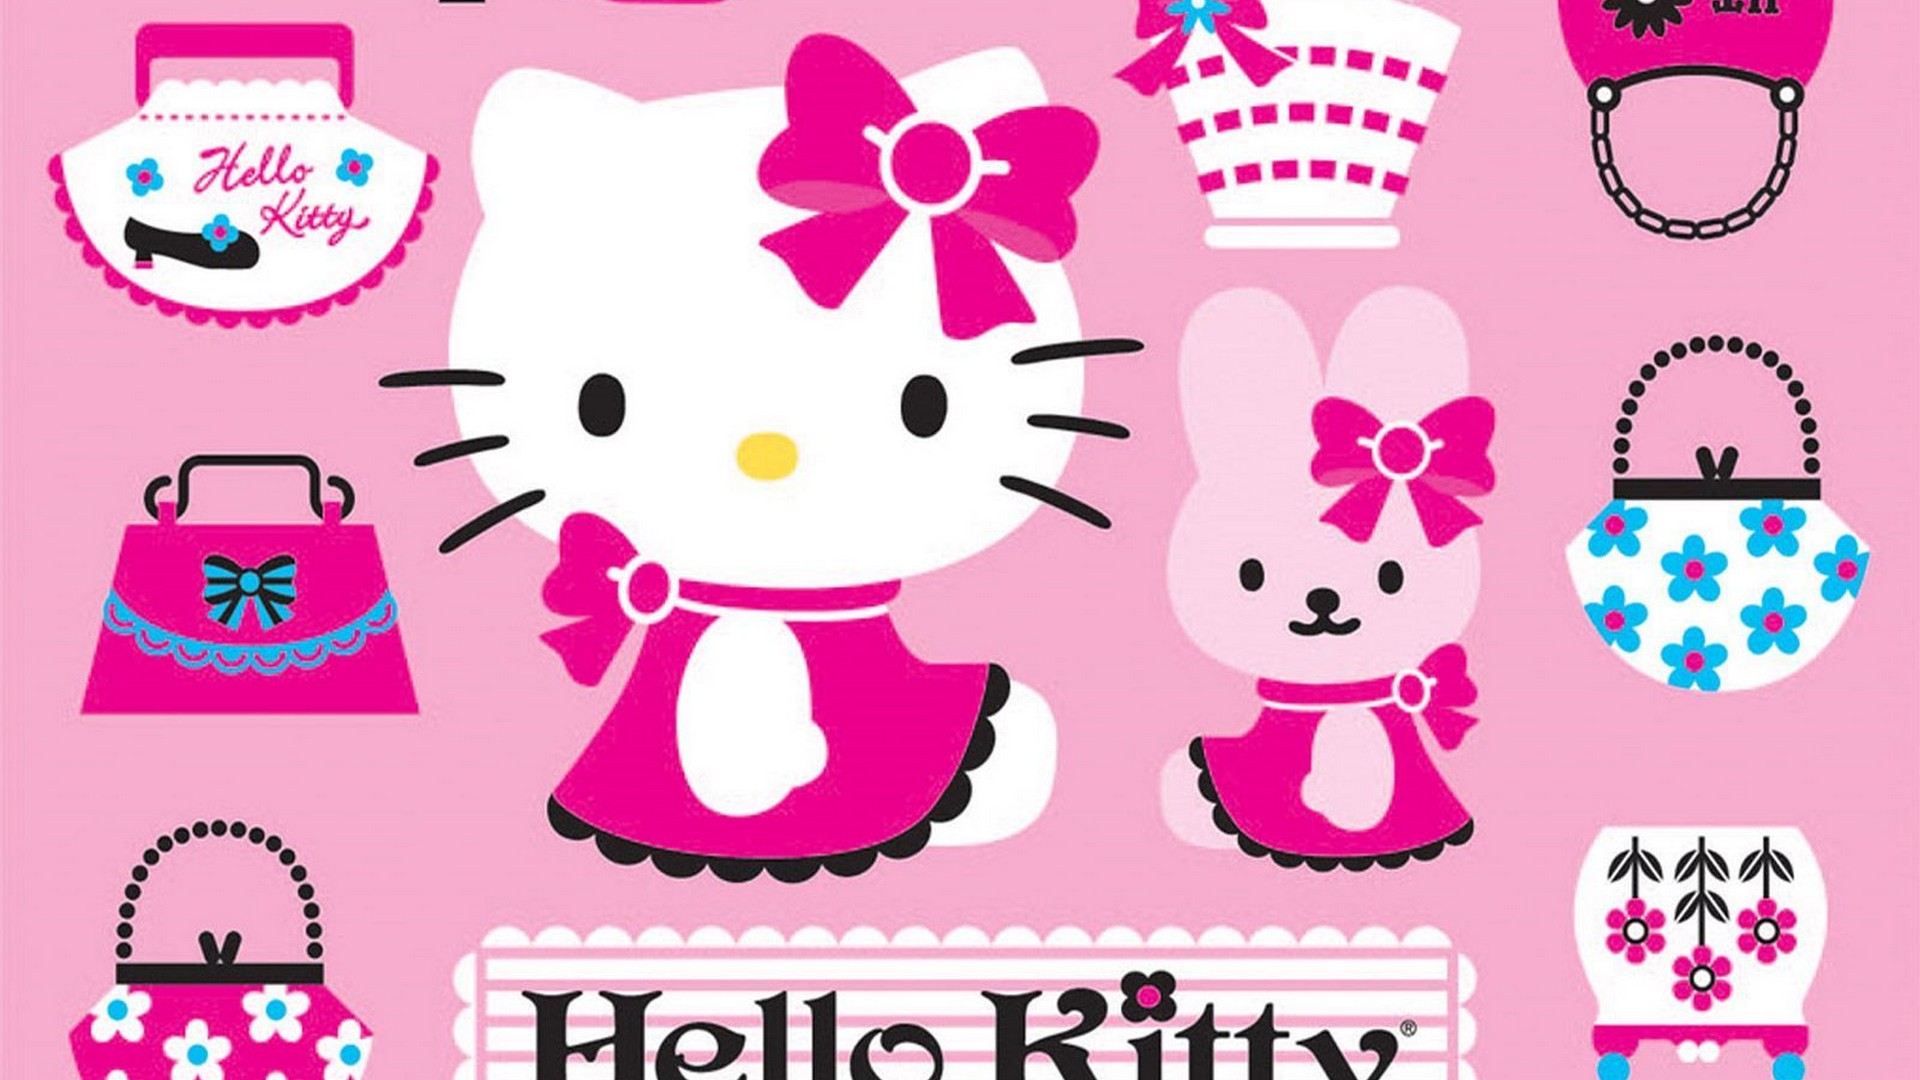 Wallpaper HD Sanrio Hello Kitty with image resolution 1920x1080 pixel. You can make this wallpaper for your Desktop Computer Backgrounds, Mac Wallpapers, Android Lock screen or iPhone Screensavers